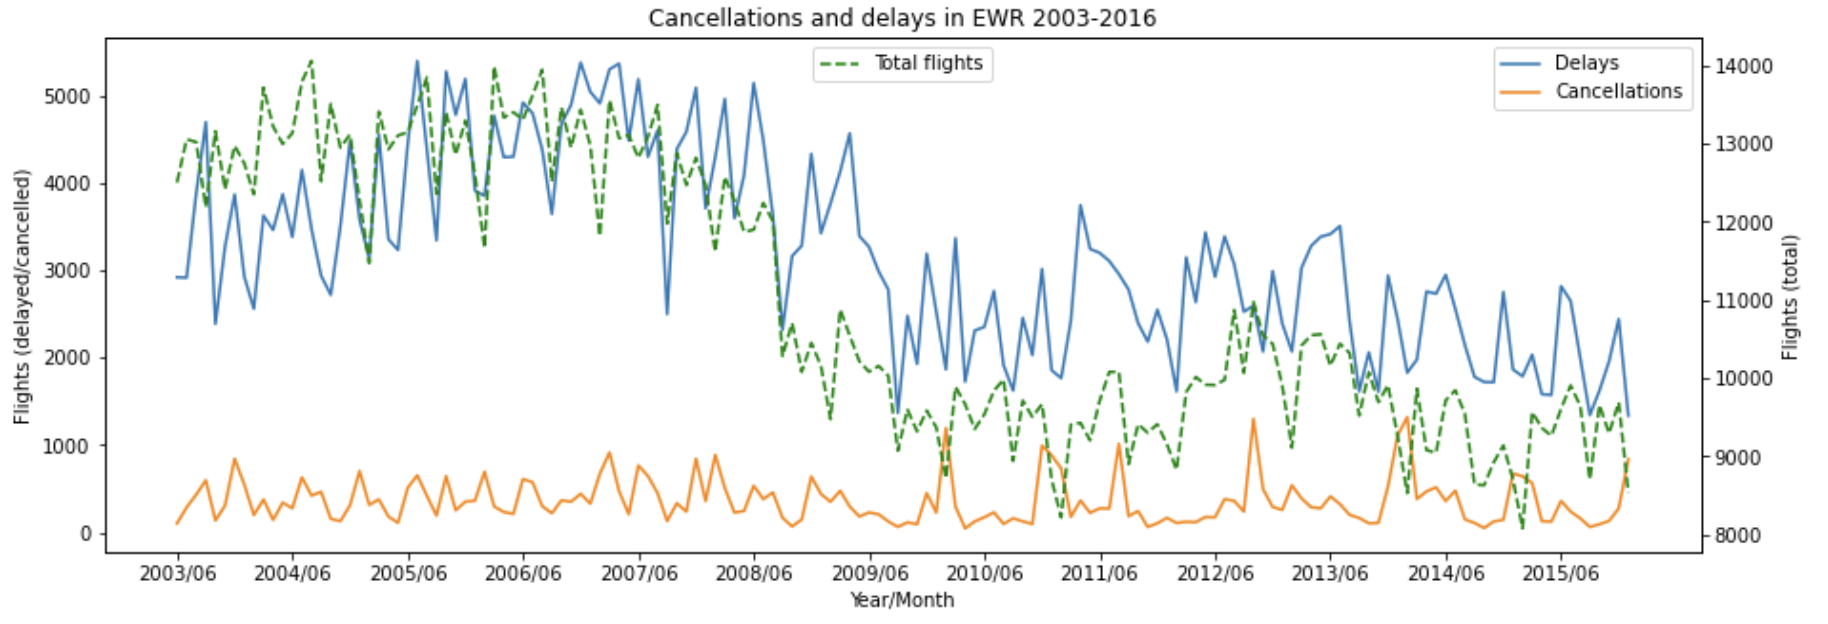 The line chart of delays, cancellation, and total number of flights